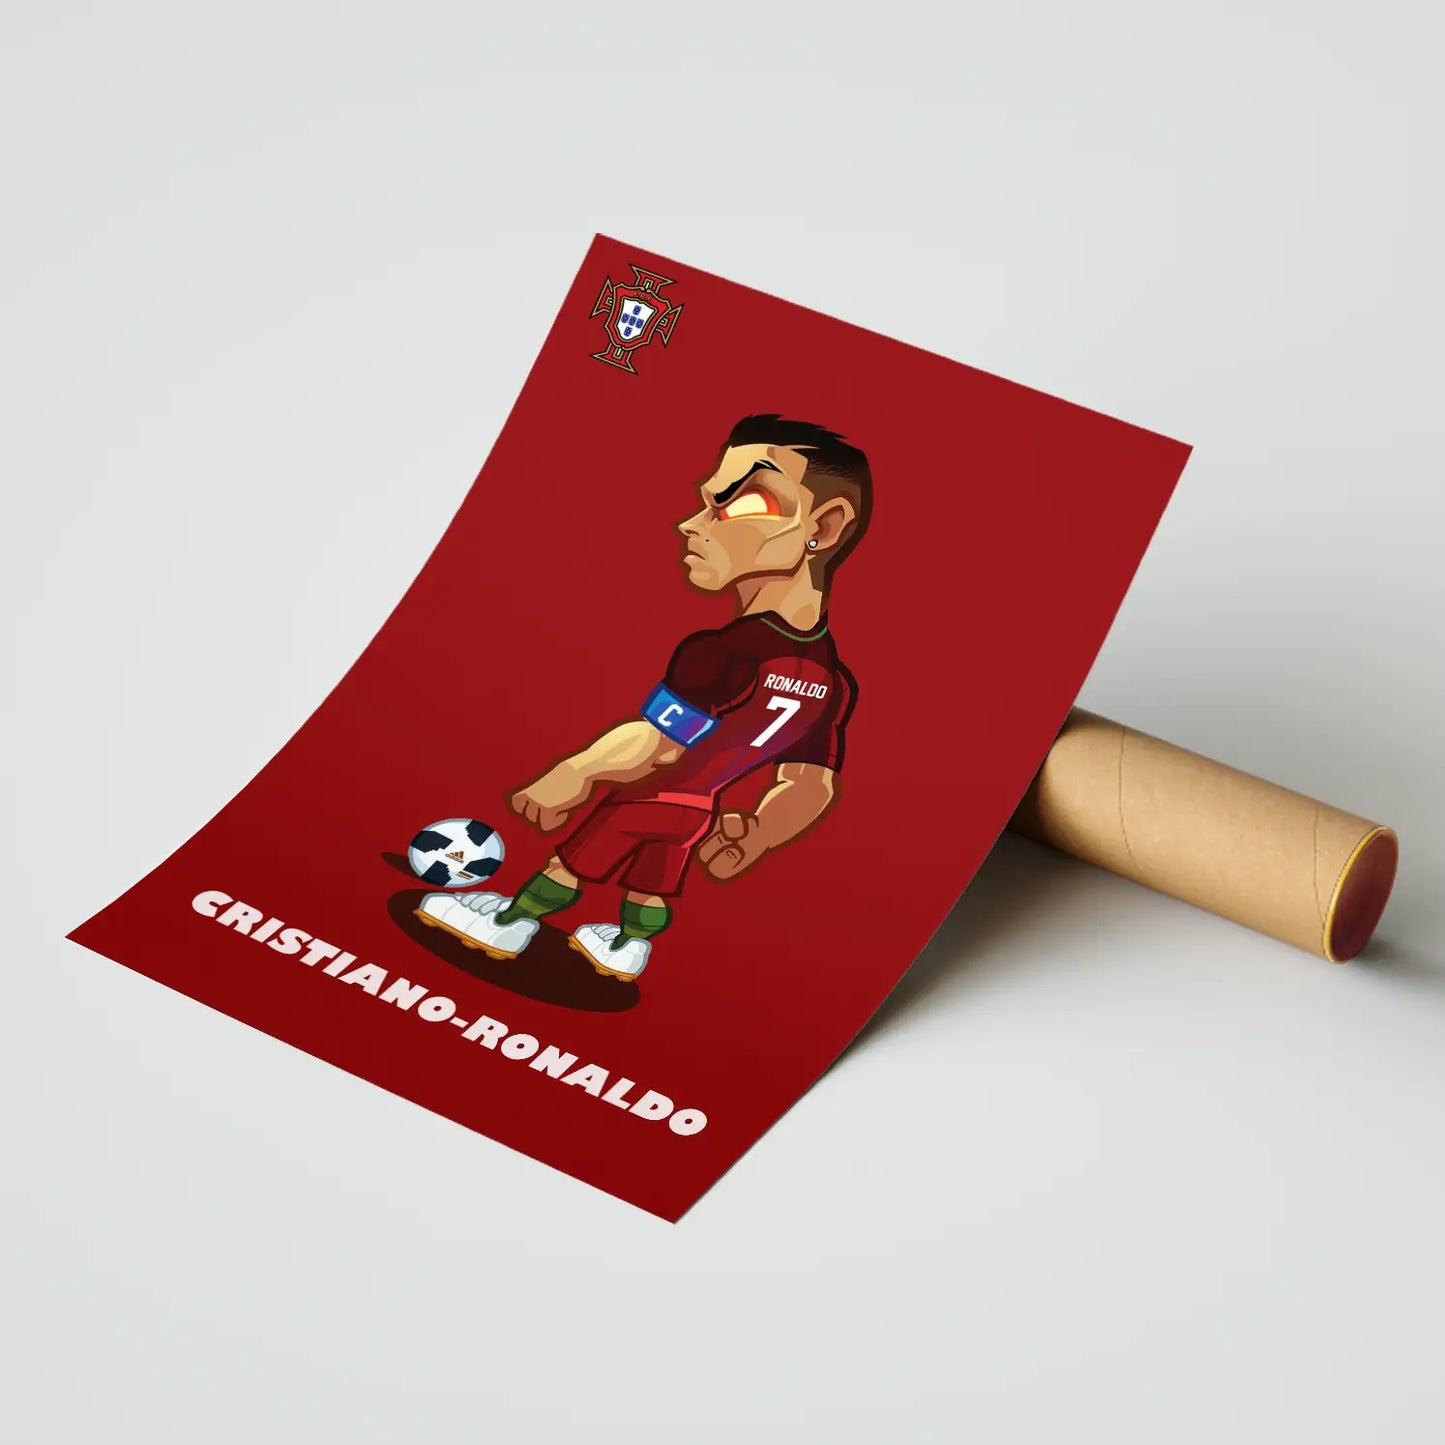 Ronaldo Cartoon Poster for Home Office and Student Room Wall | Poster | Frame | Canvas